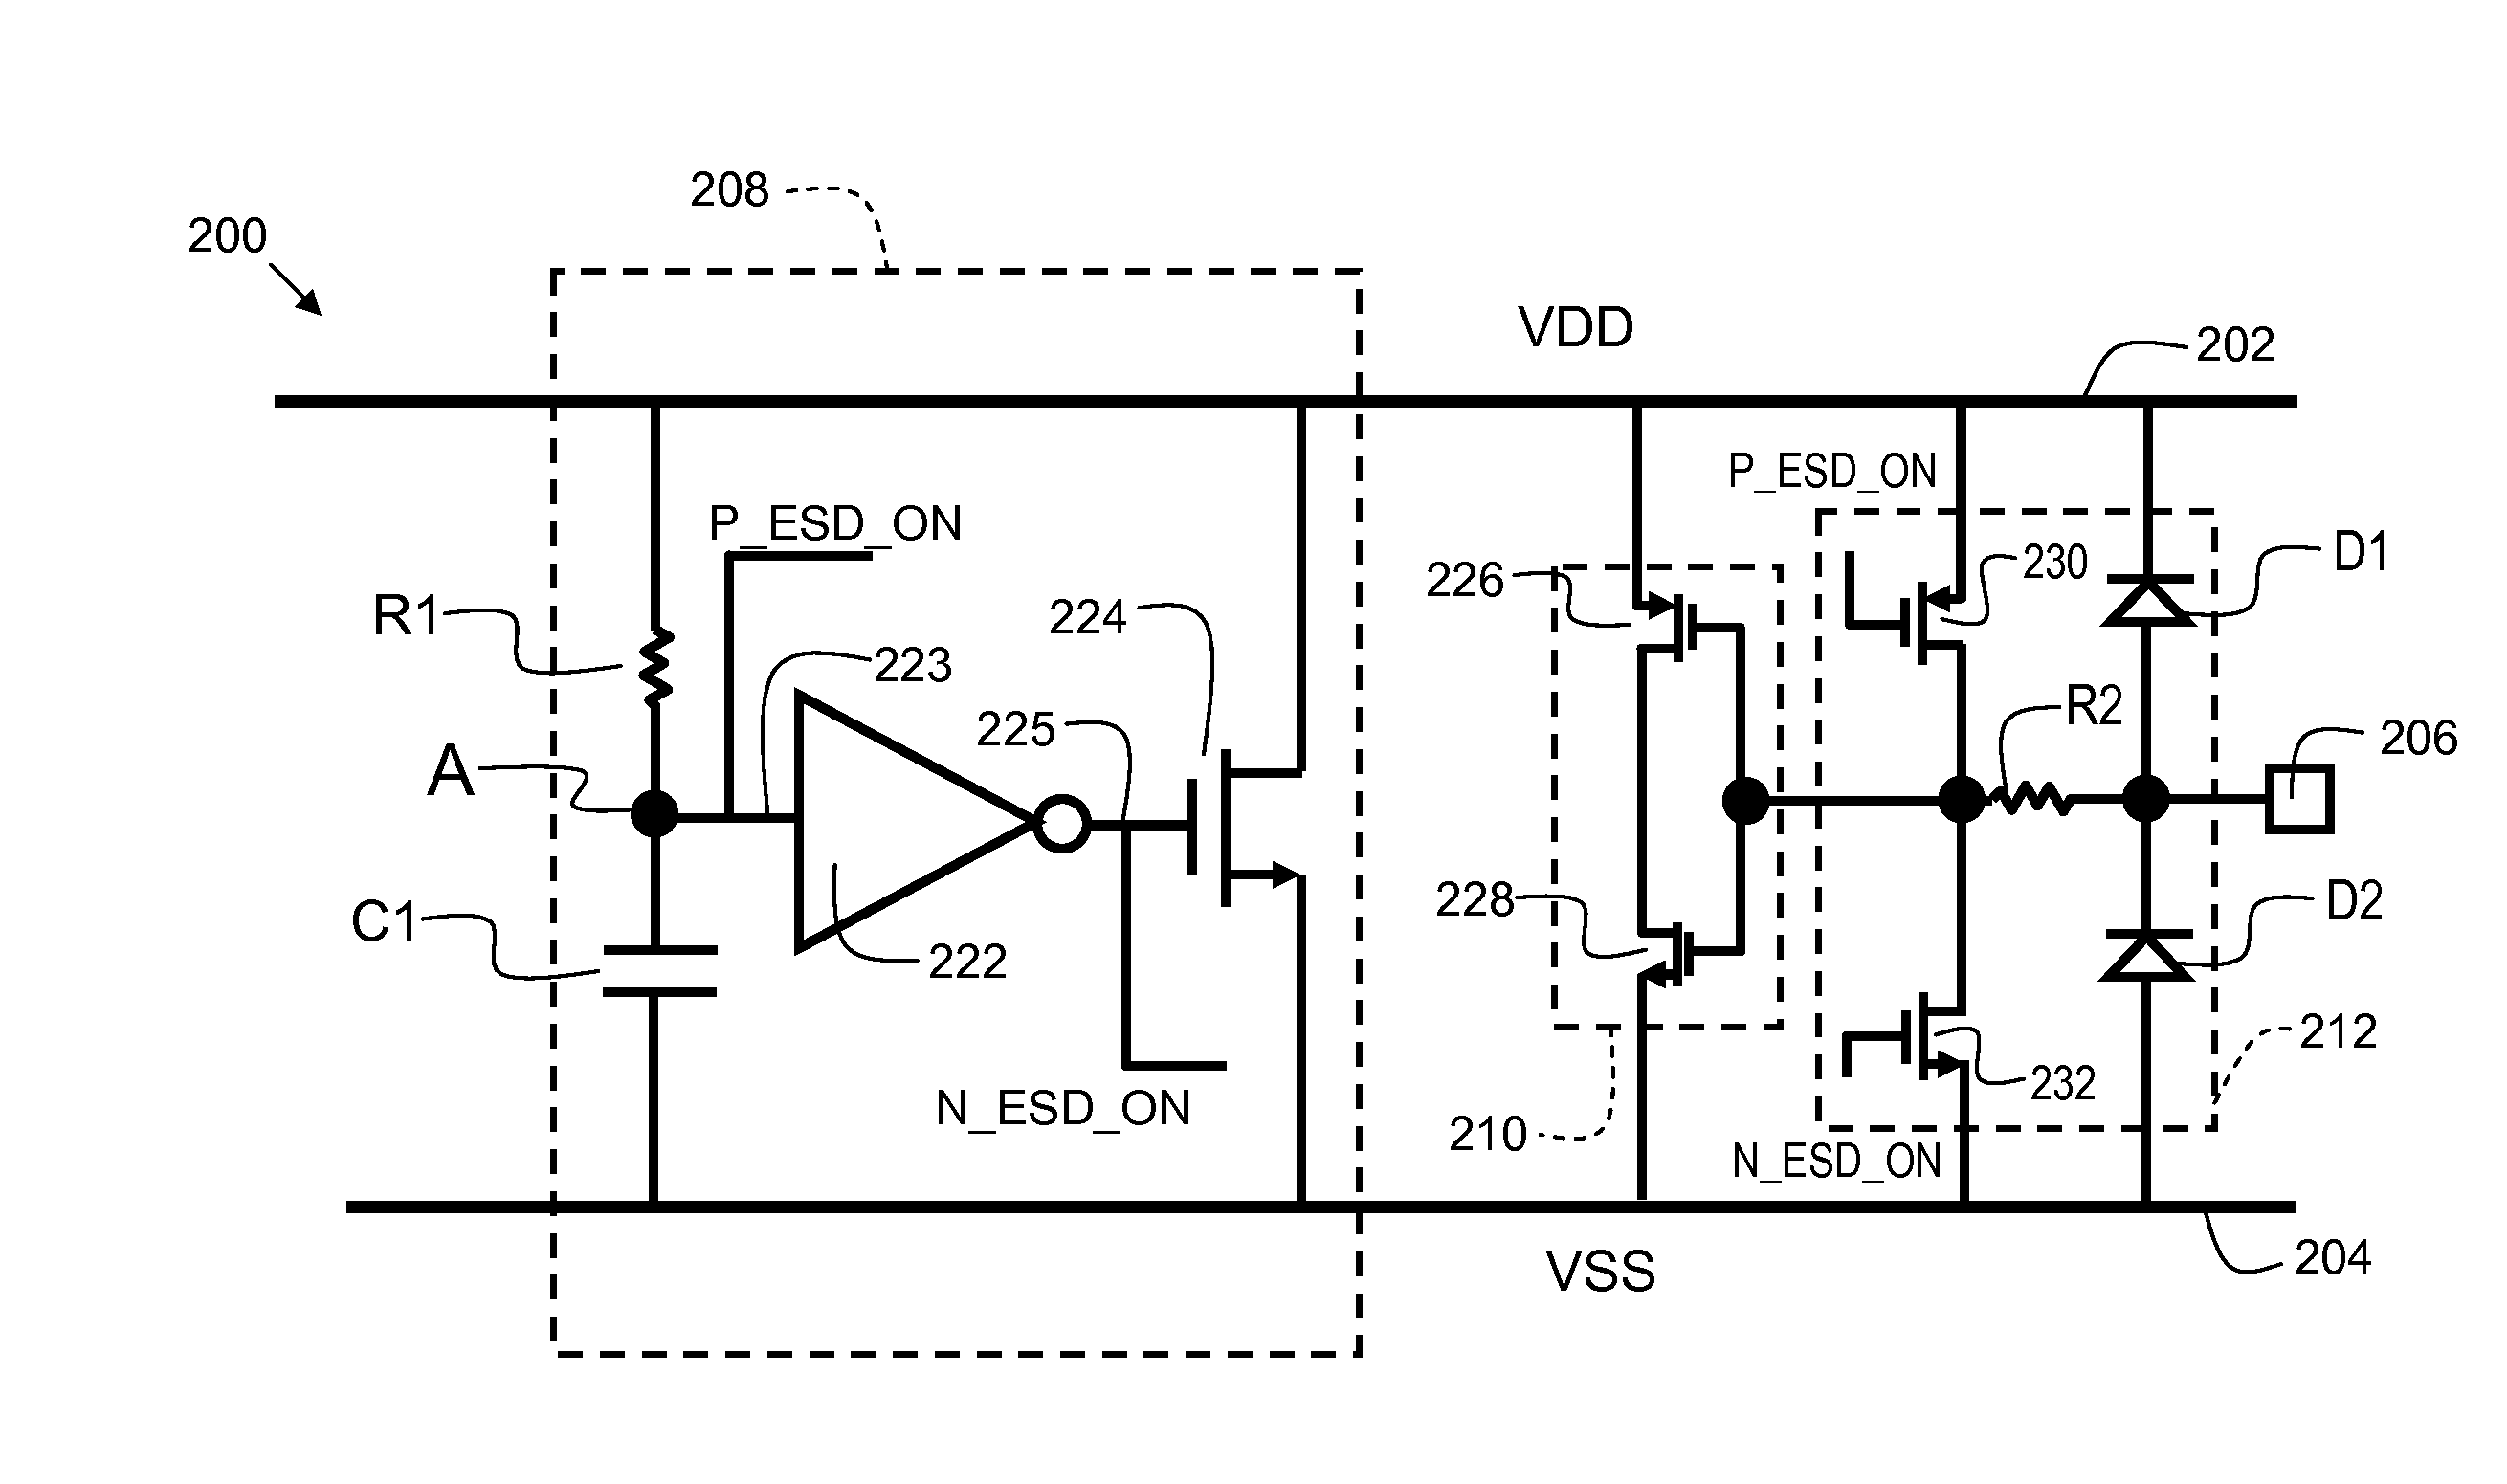 Enhanced charge device model clamp